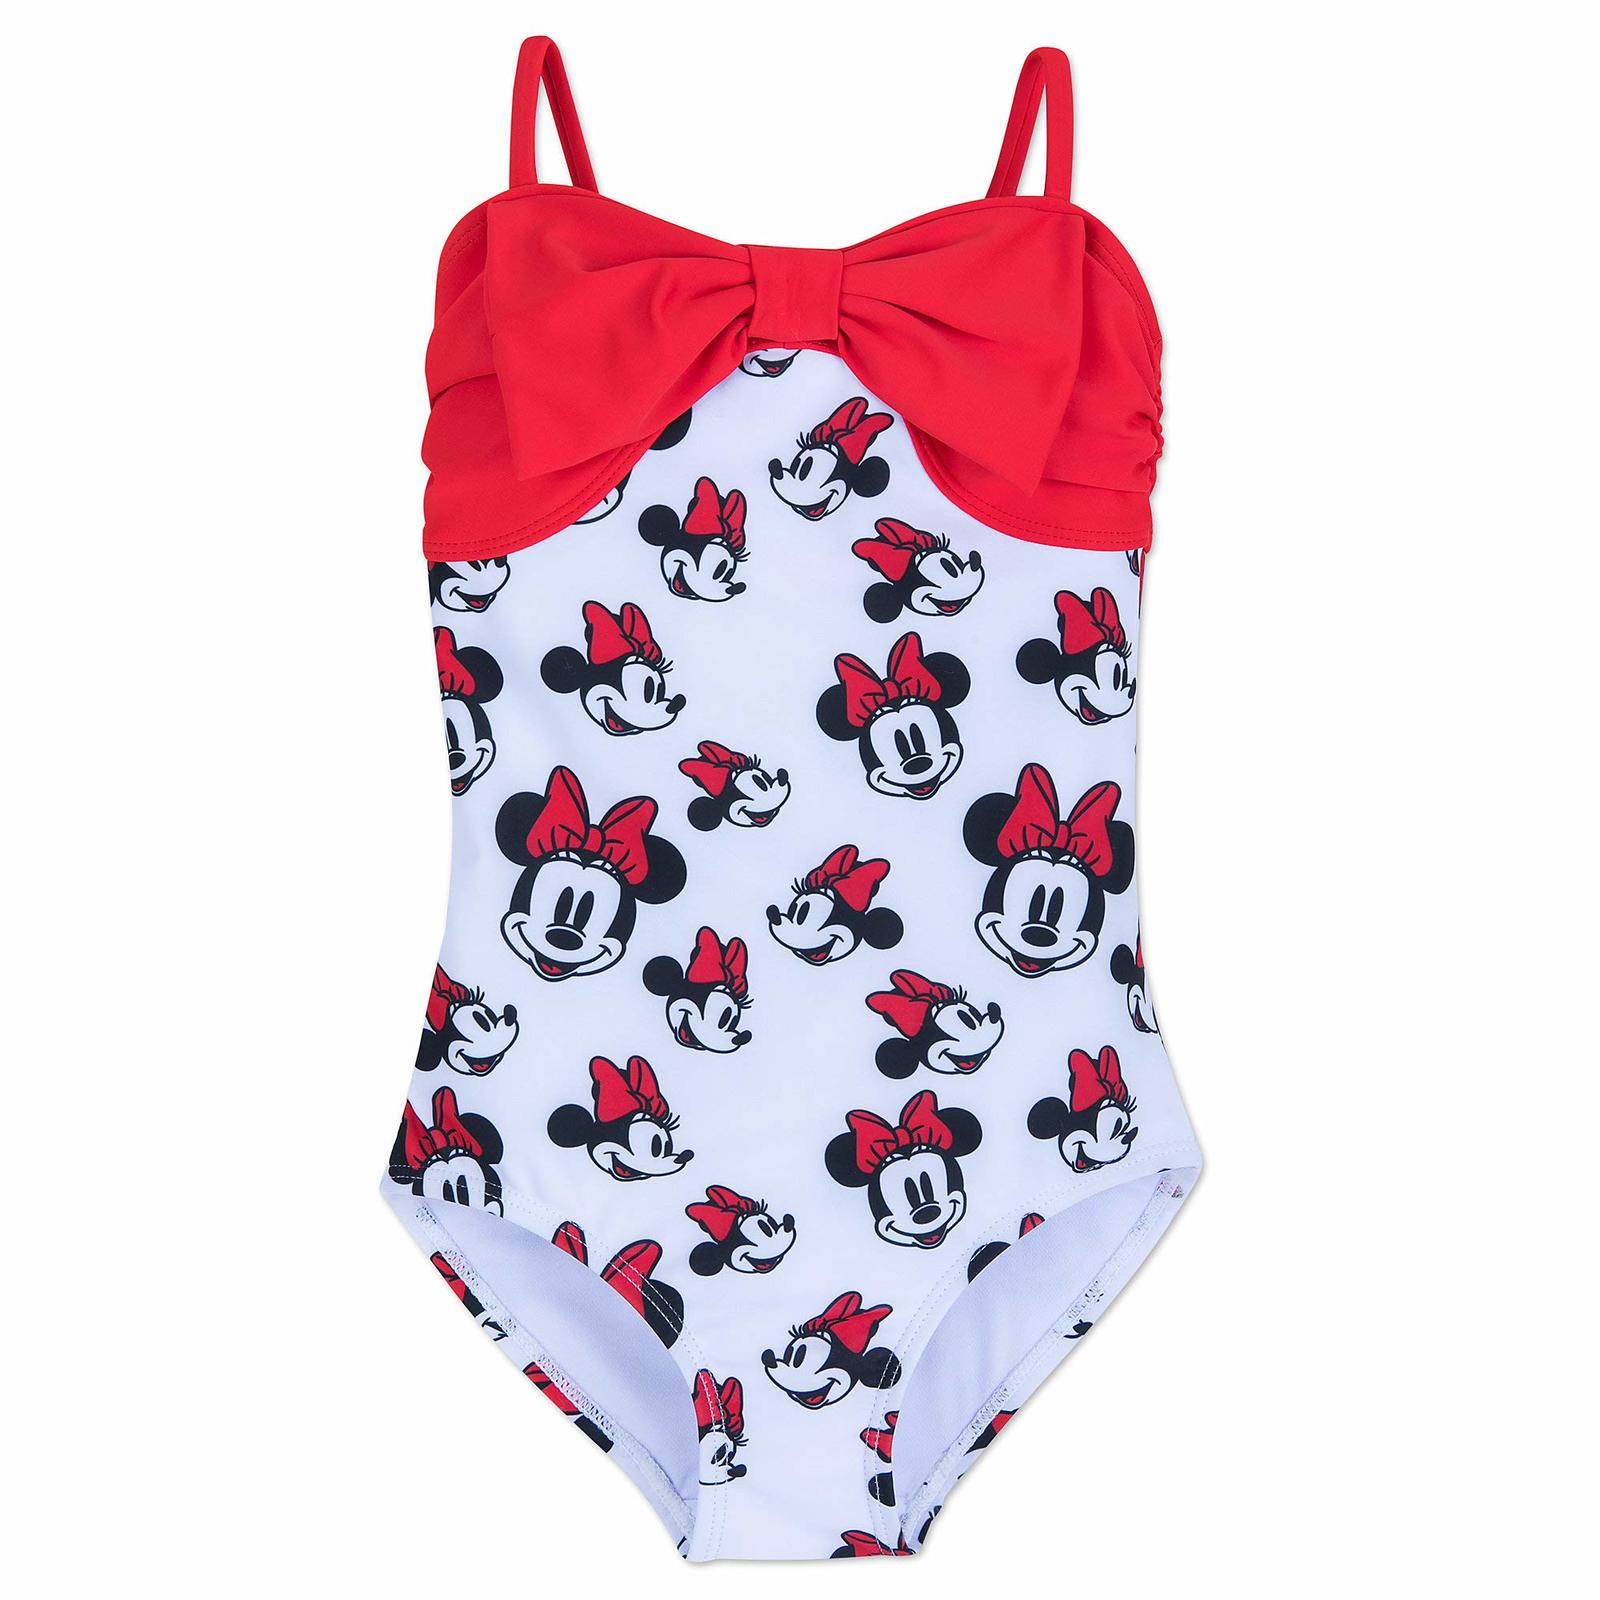 Primary image for Disney Minnie Mouse Swimsuit for Girls SPF50 Size 3 Red